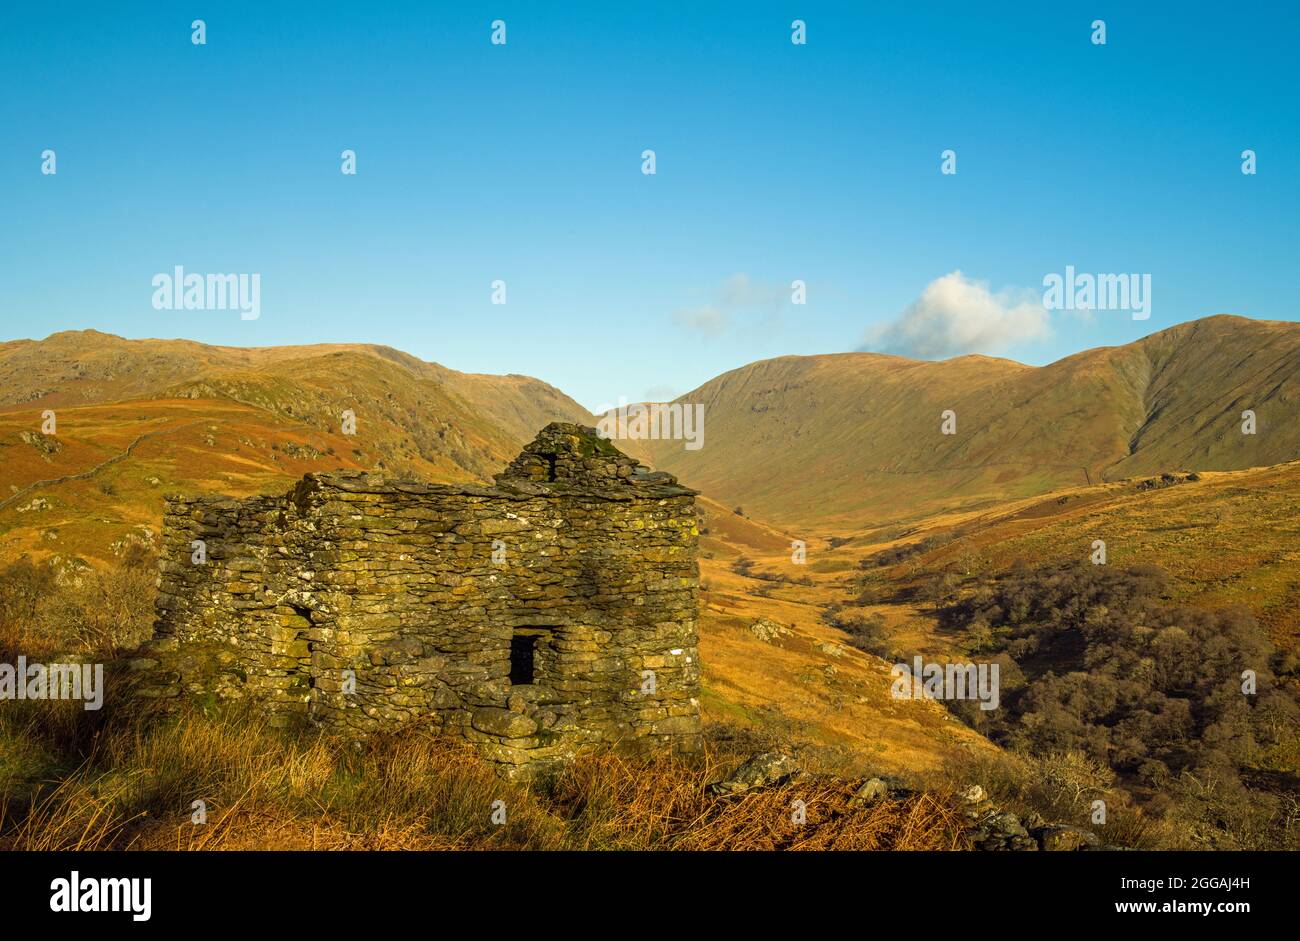 The upper section of the Troutbeck valley in the Lake District National Park with fells and an old abandoned barn, on a clear sunny winter day Stock Photo